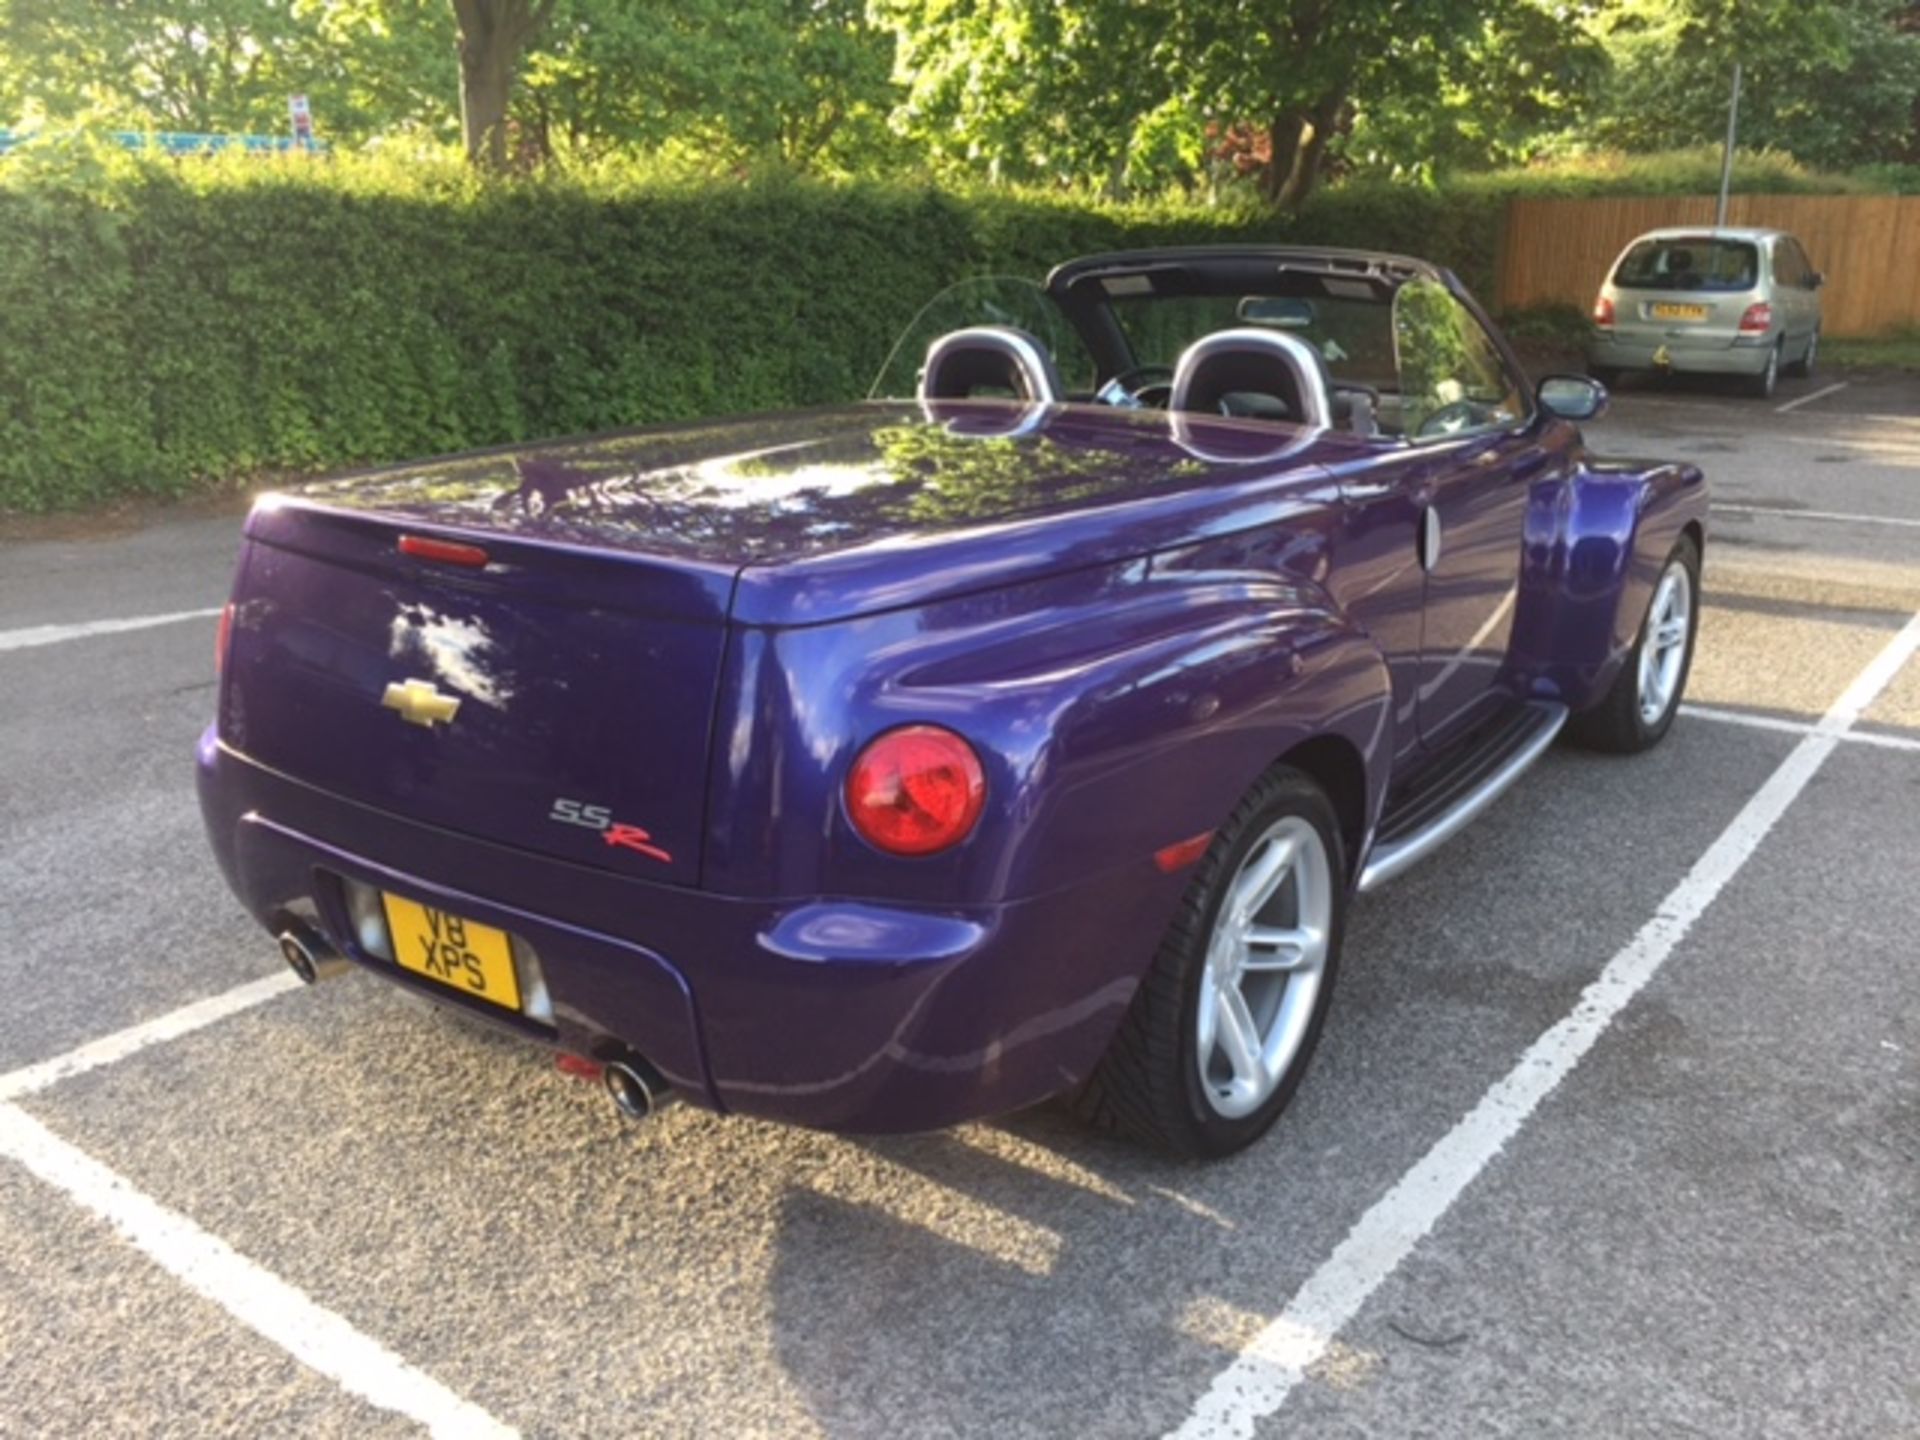 2005 CHEVROLET SSR IN LIMITED EDITION Ultra Violet Metallic - Image 18 of 33